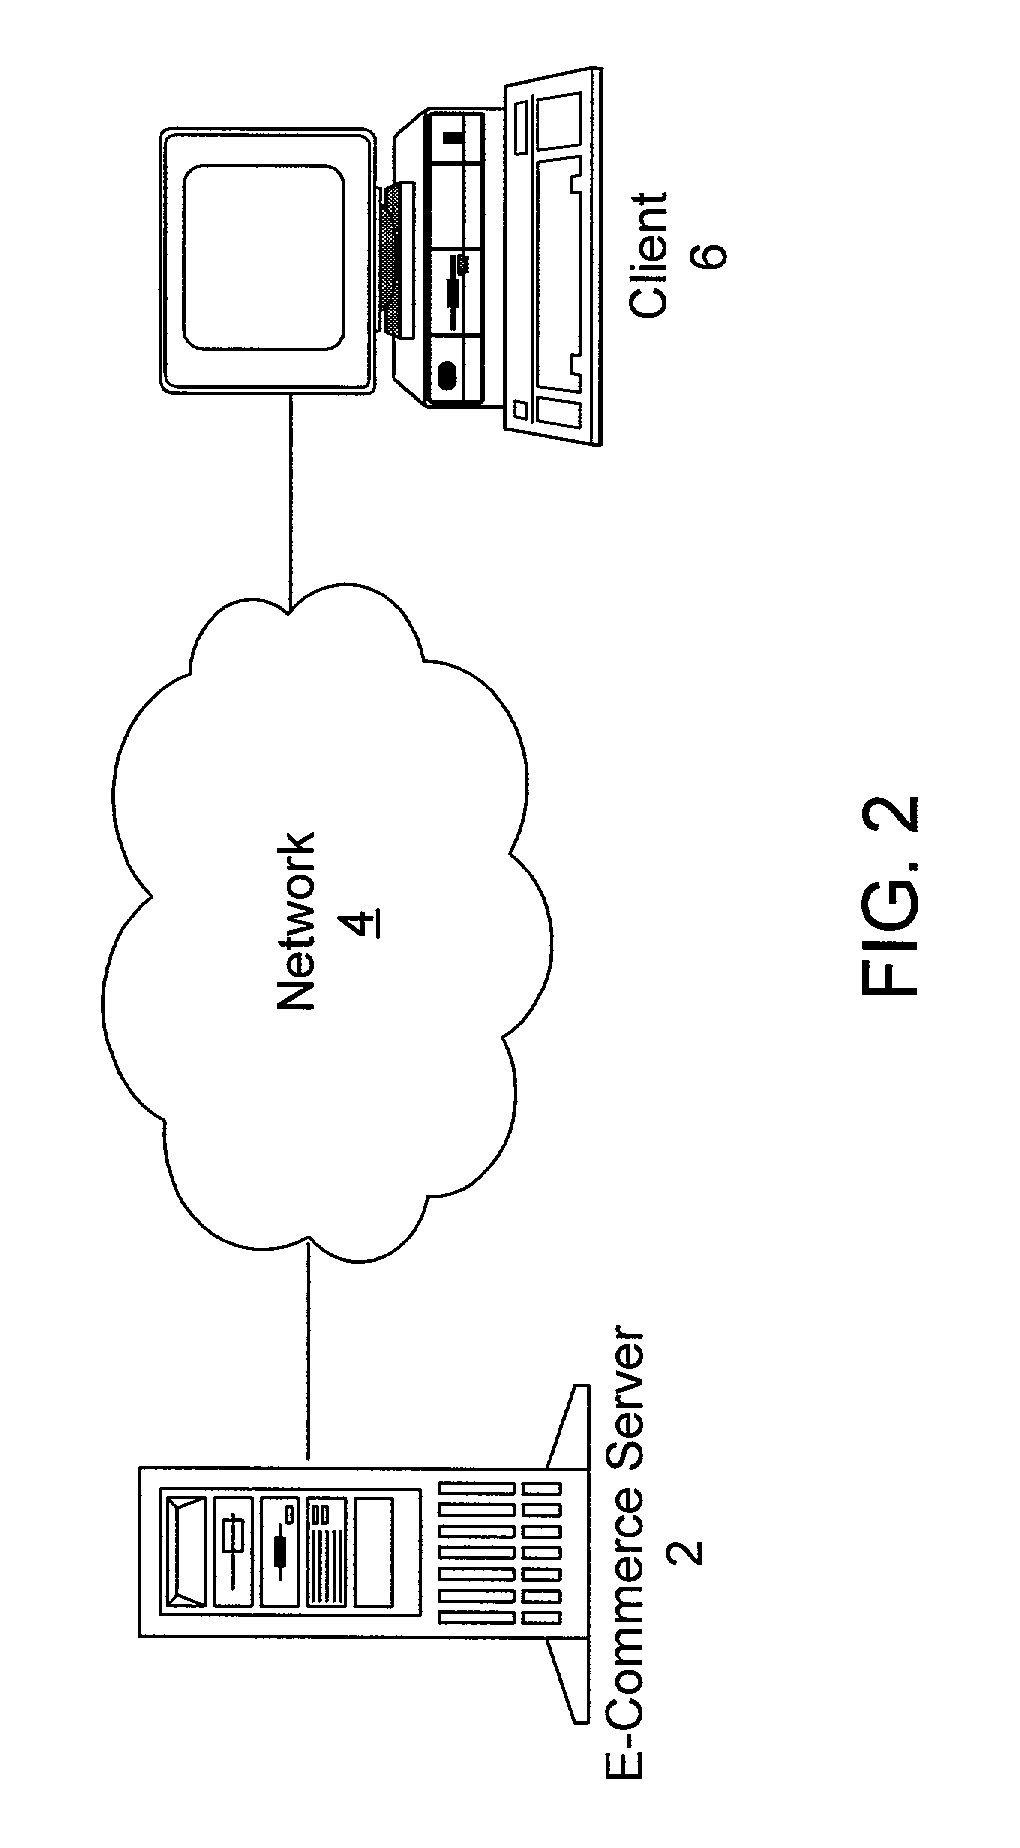 System and method for pre-processing input data to a non-linear model for use in electronic commerce